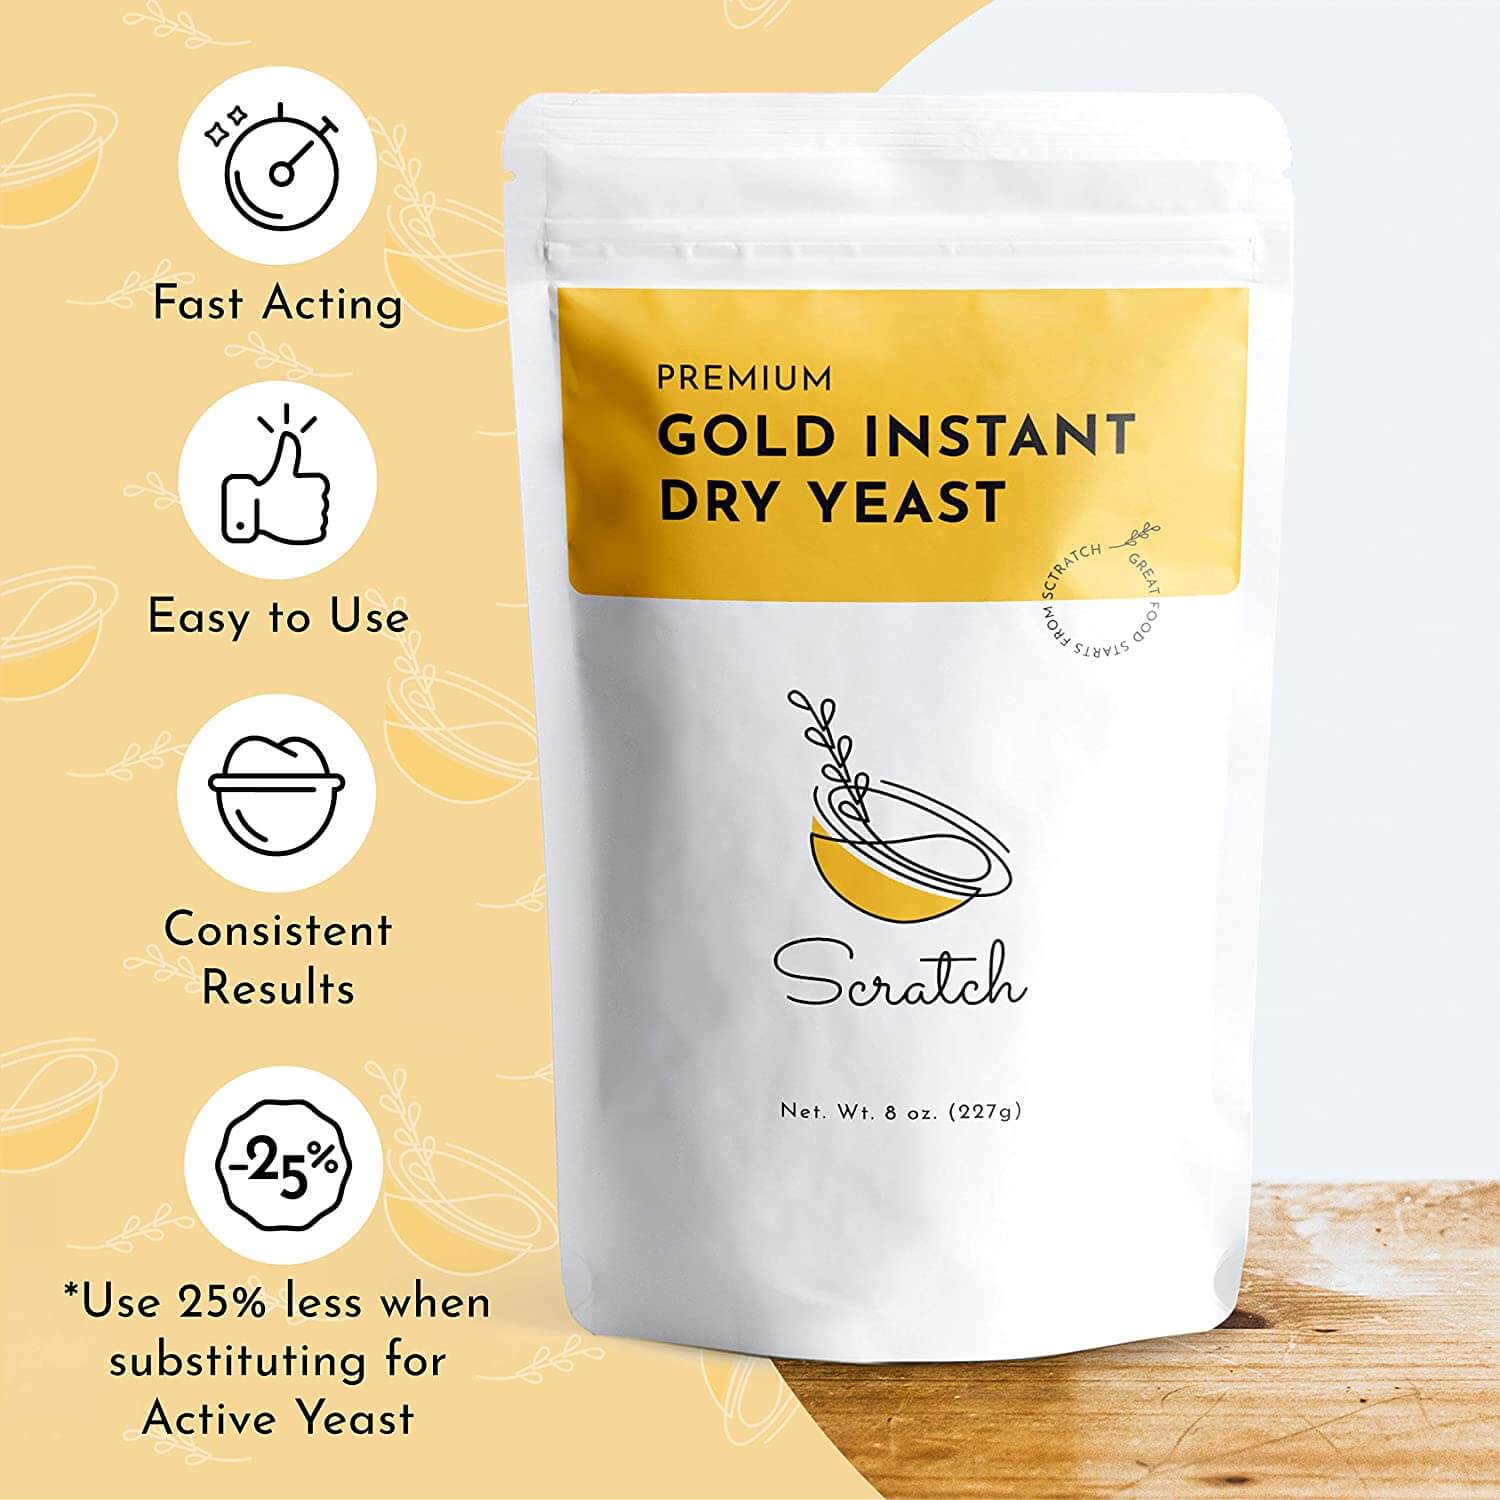 Scratch Gold Instant Rapid-Rise Dry Yeast - 8 oz - Baking Properties